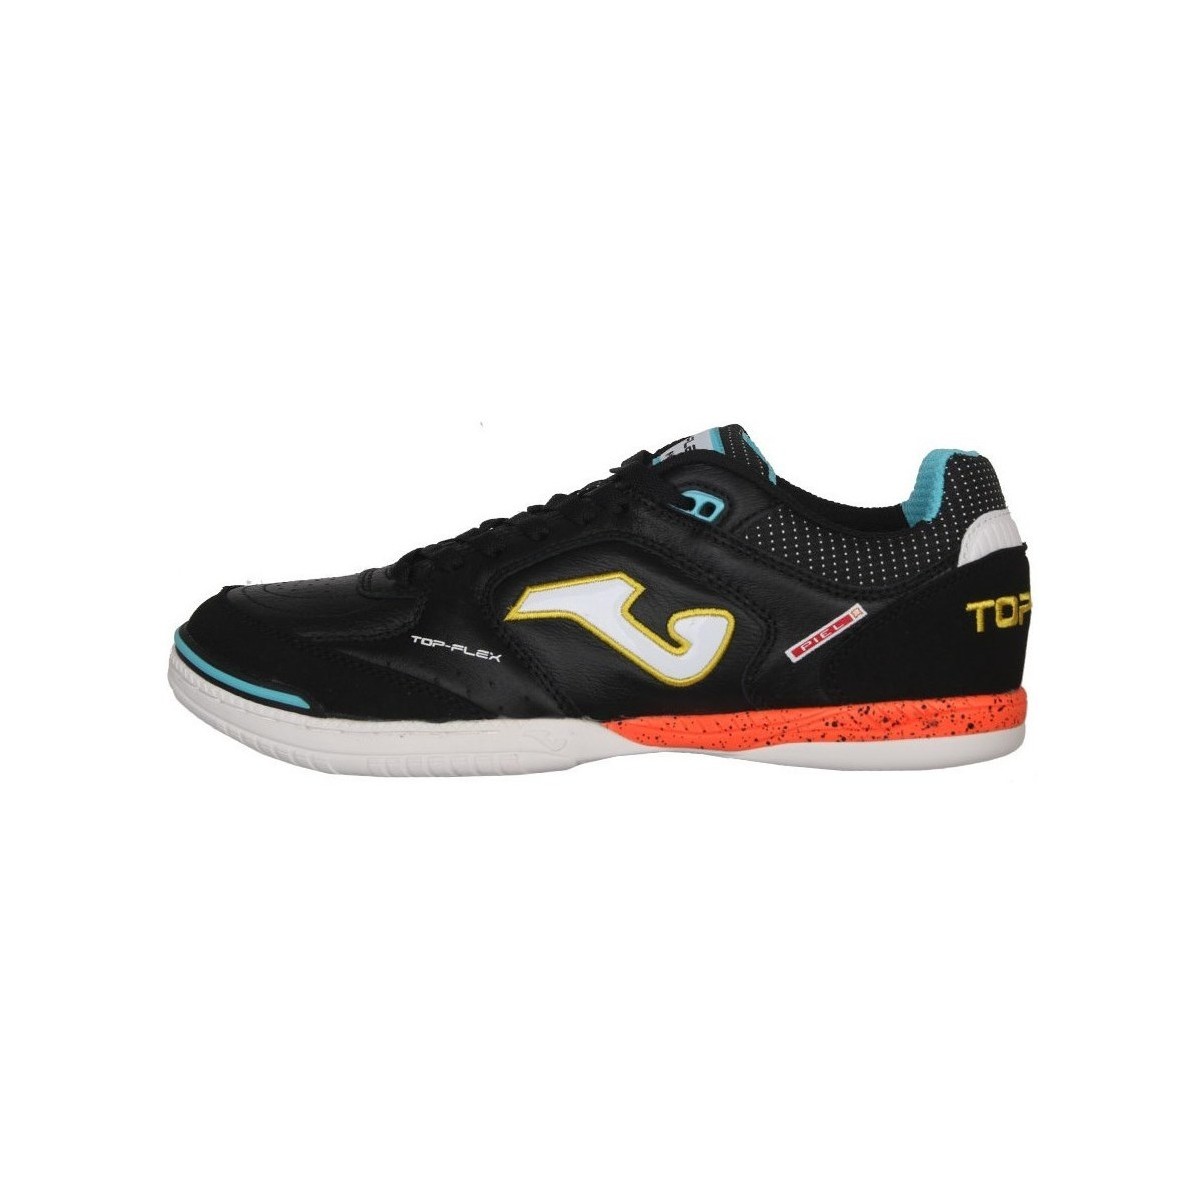 Chaussures Homme Football Joma Top Flex 2301 IN Noir